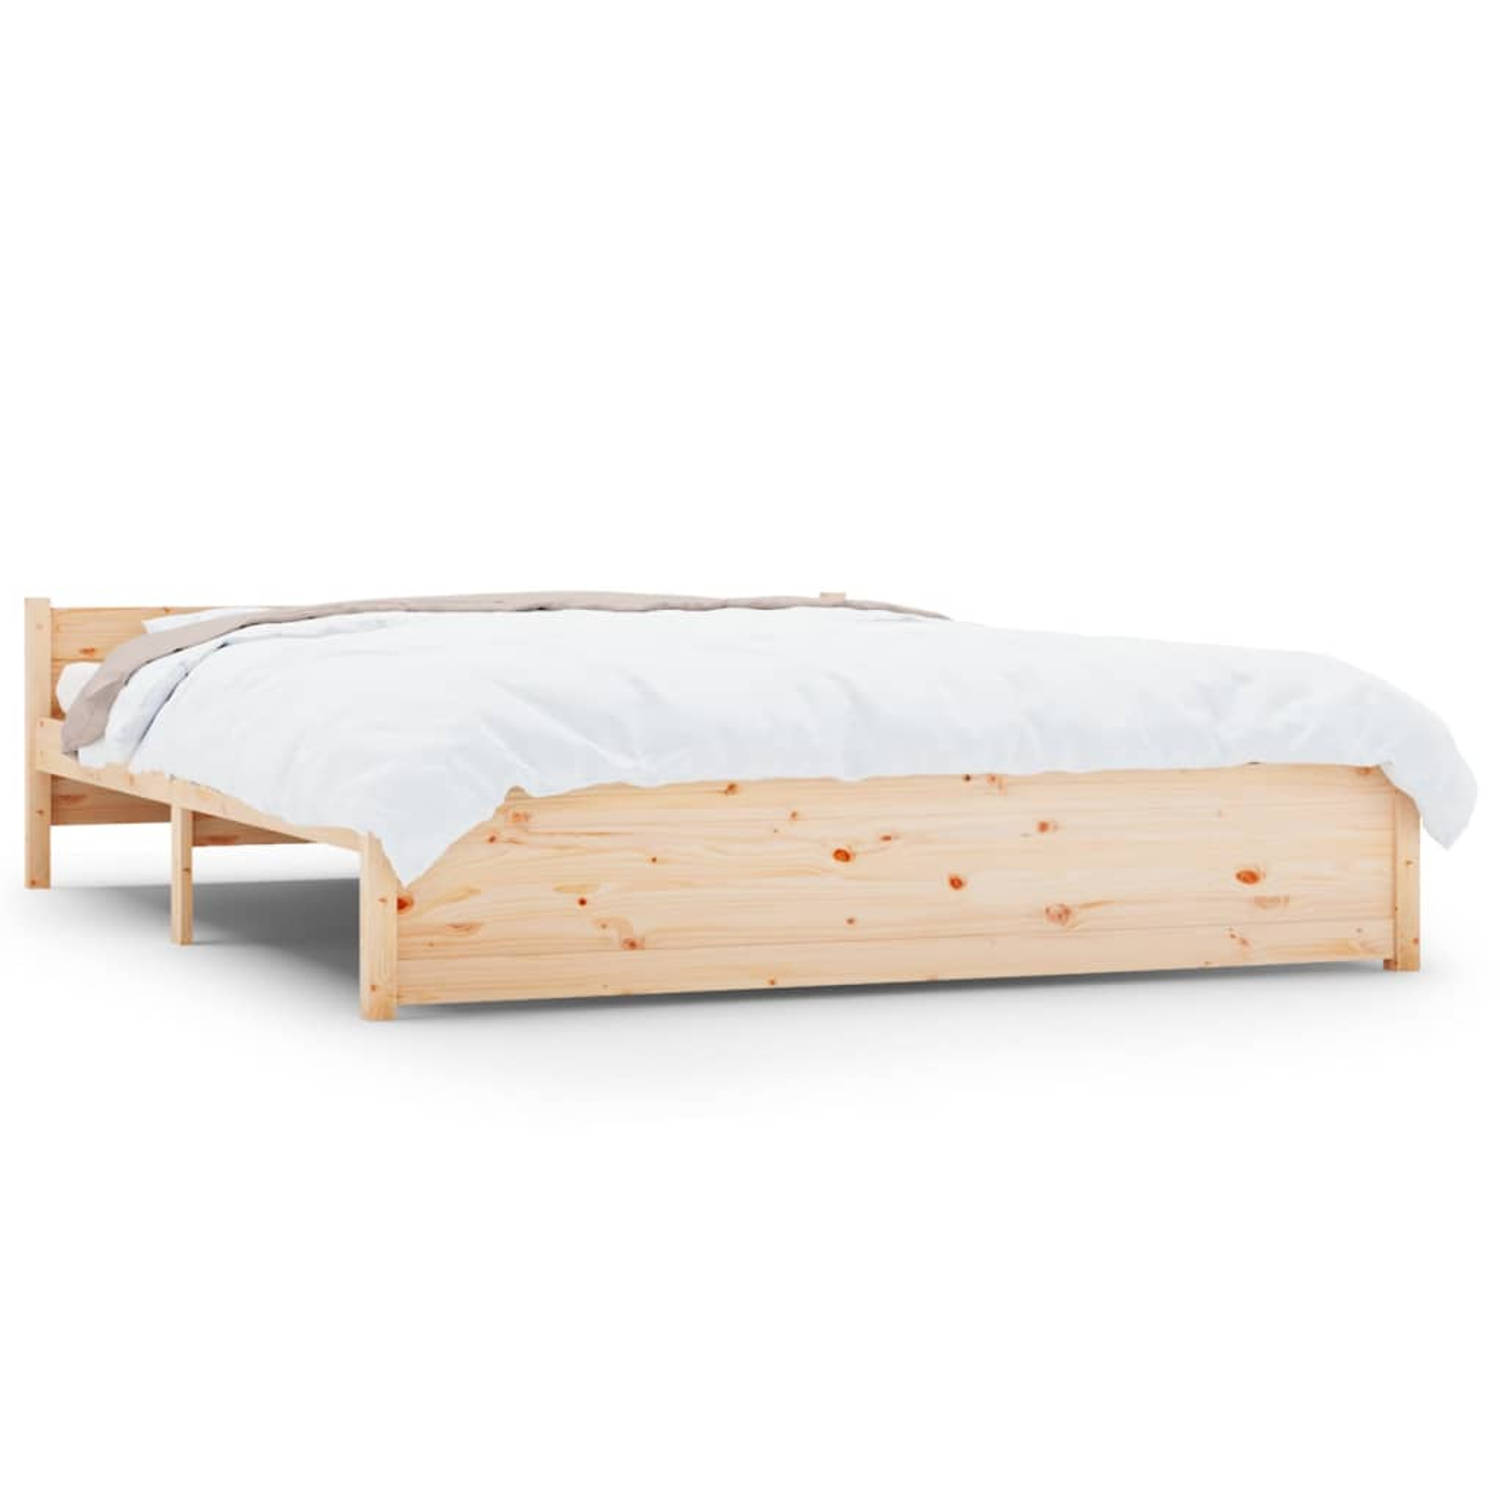 The Living Store Bedframe massief hout 150x200 cm 5FT King Size - Bedframe - Bedframes - Bed - Bedbodem - Ledikant - Bed Frame - Massief Houten Bedframe - Slaapmeubel - Tweepersoon